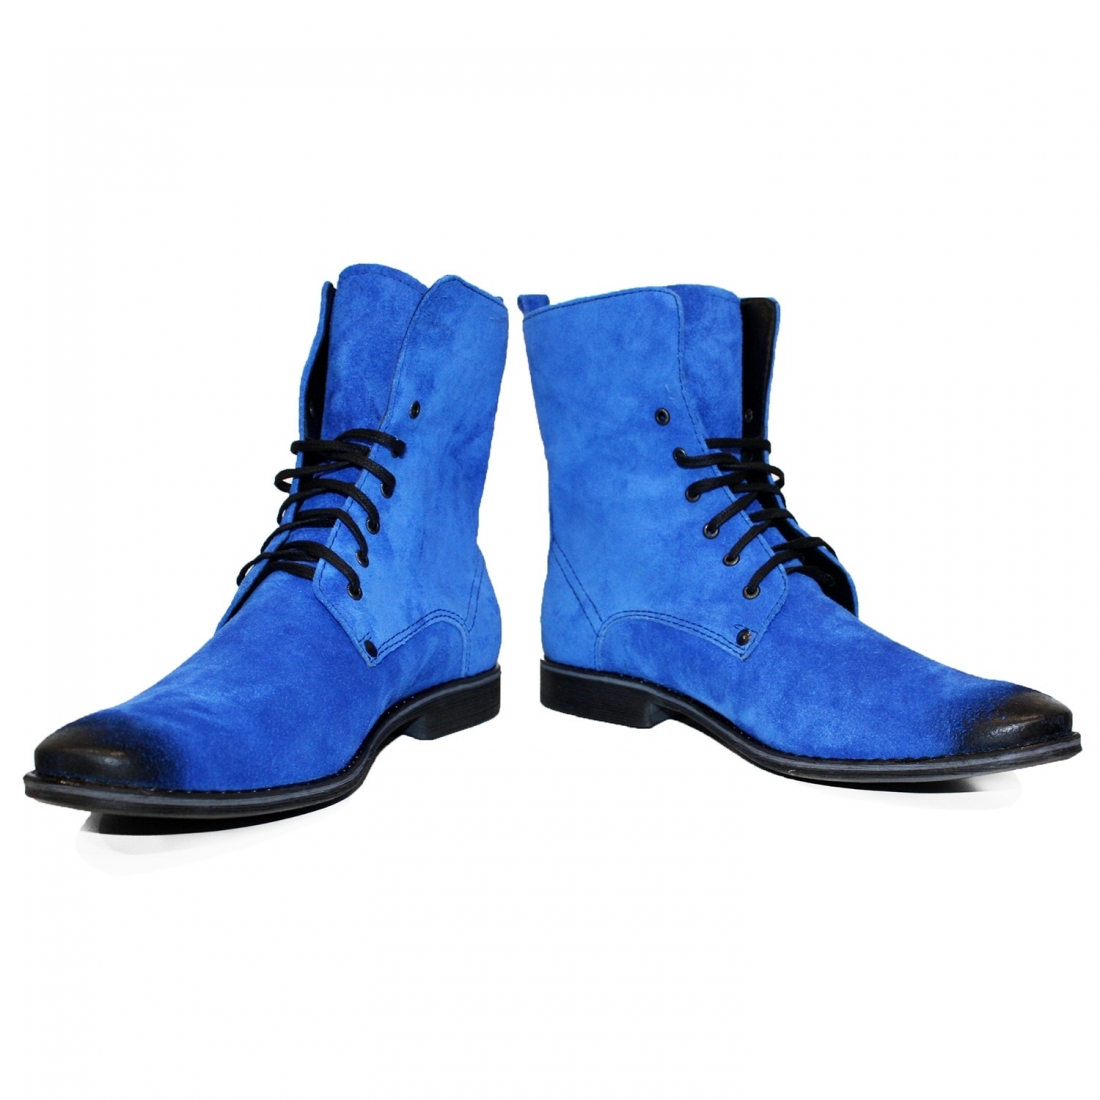 Modello Domatetto - Stiefel Hoher Schaft - Handmade Colorful Italian Leather Shoes